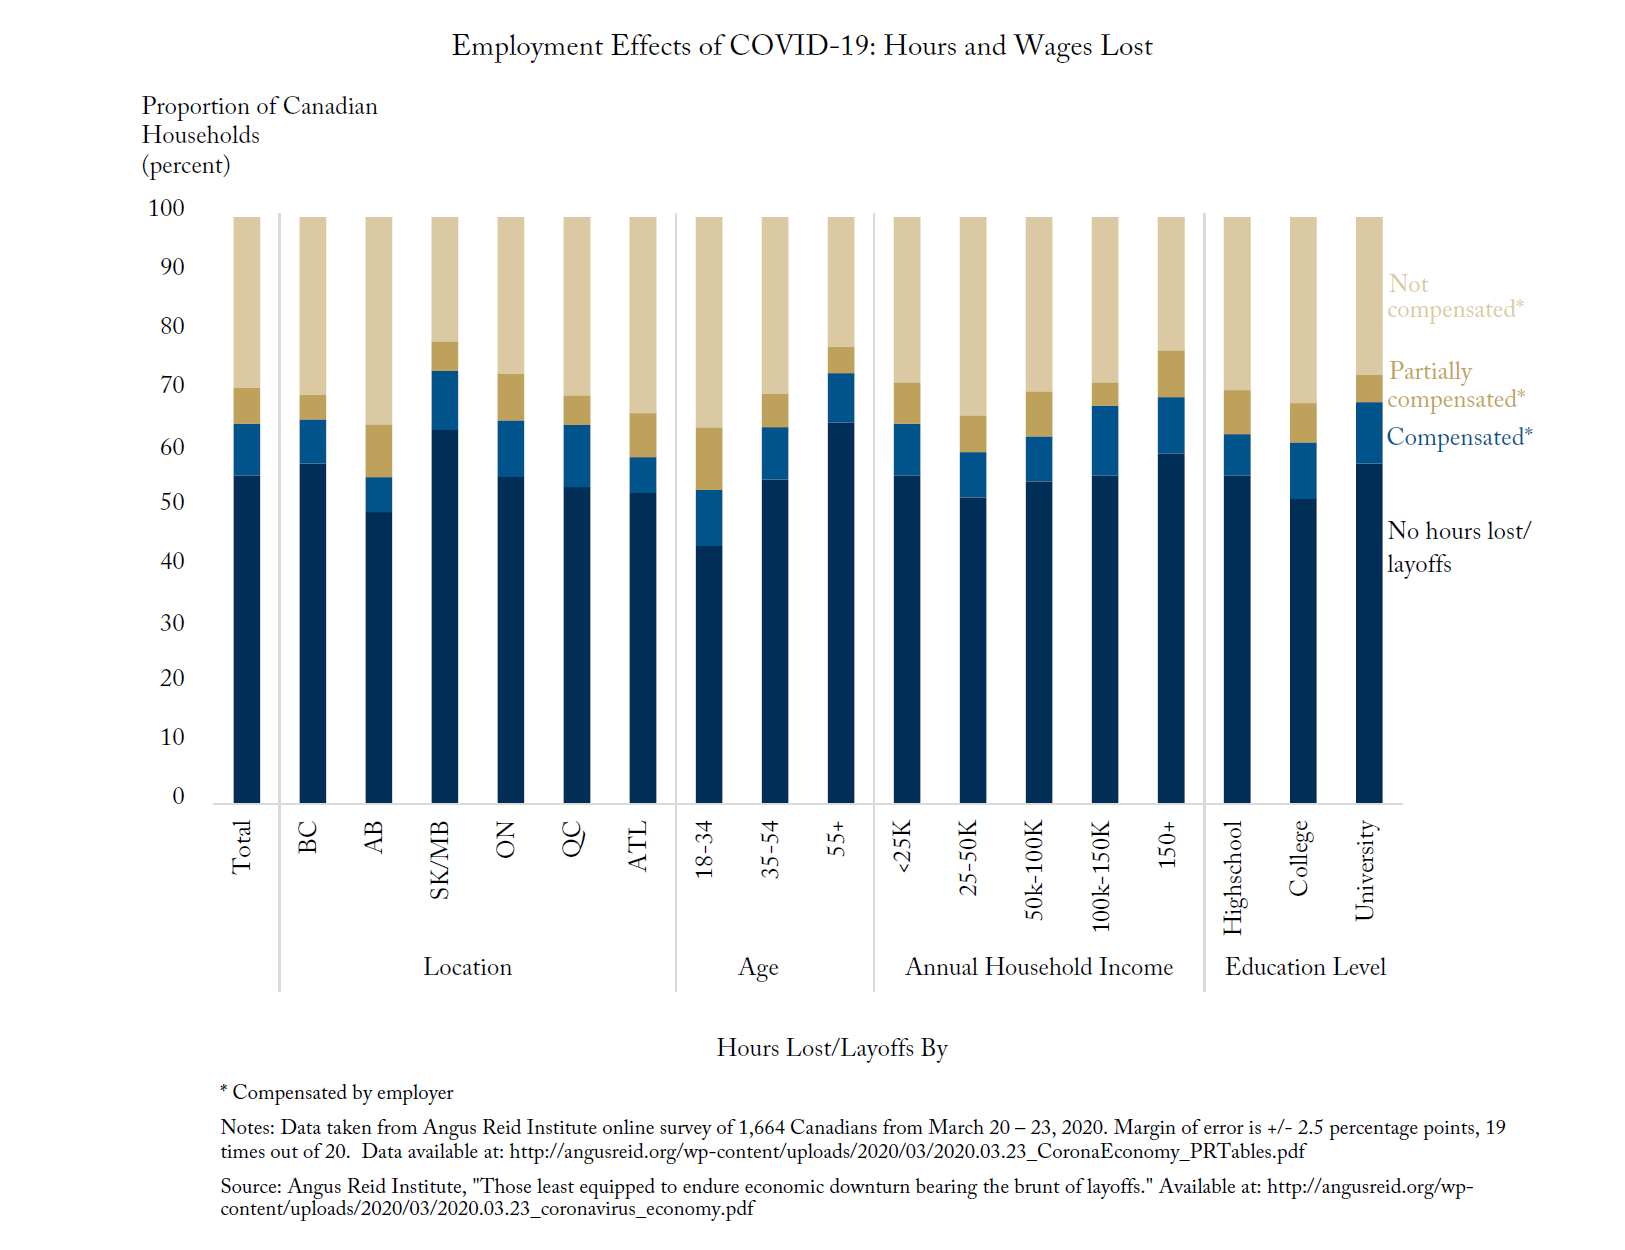 Hitting Home: Hours and Wages Lost to COVID-19 by Location, Age, Income and Education